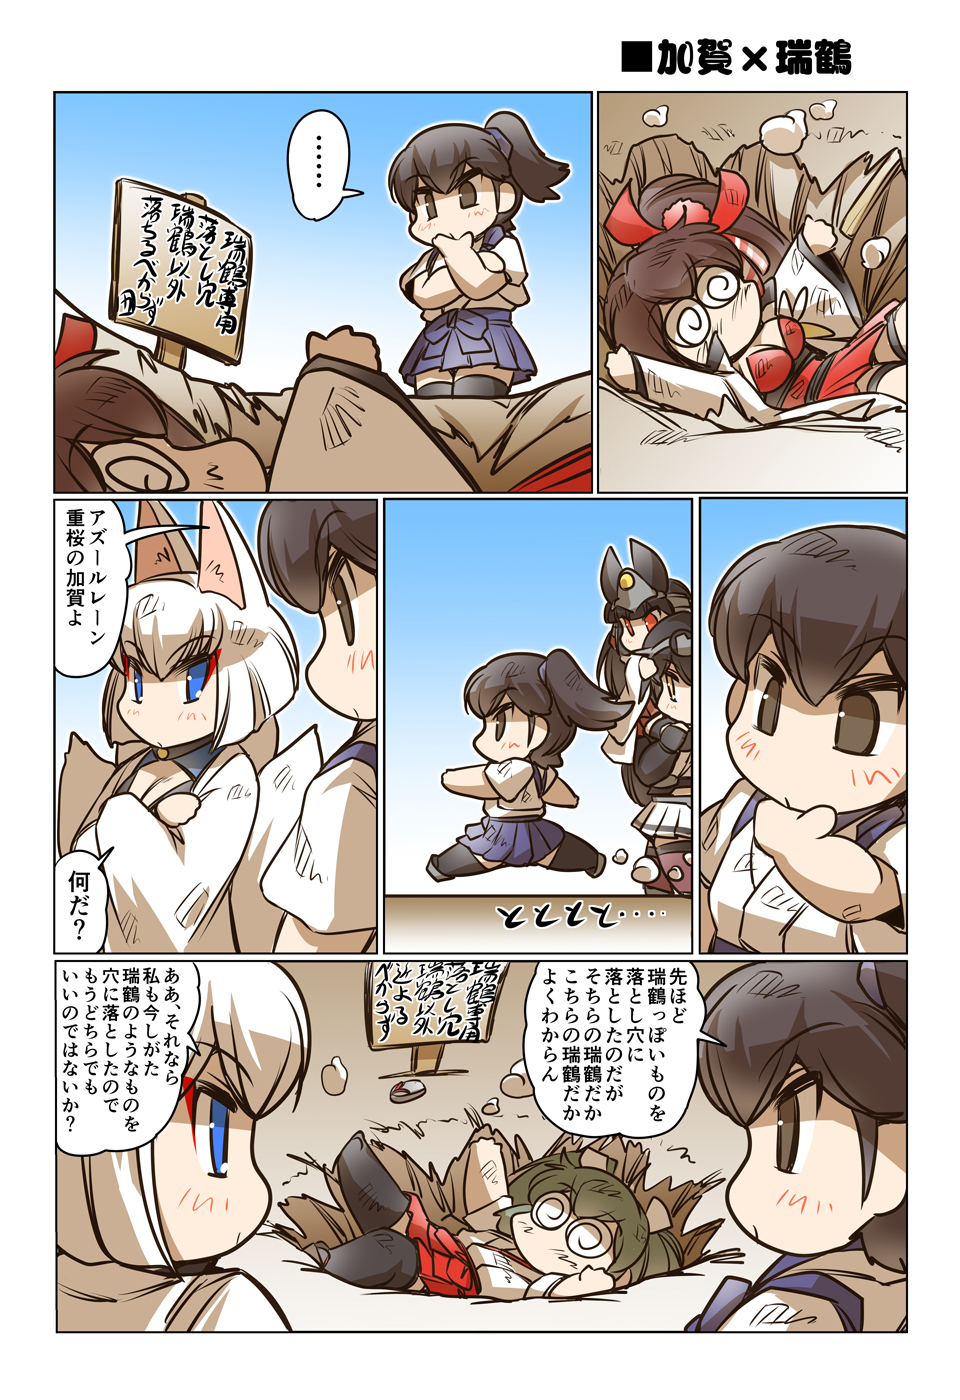 ... 6+girls @_@ animal_ears arms_up azur_lane black_hair blue_eyes breasts brown_hair carrying chibi cleavage collar comic commentary_request crossed_arms eyebrows_visible_through_hair eyeshadow fox_ears fox_tail green_hair hair_between_eyes hair_ribbon hand_on_own_elbow headgear highres hisahiko japanese_clothes kaga_(azur_lane) kaga_(kantai_collection) kantai_collection kimono large_breasts long_hair long_sleeves makeup midriff multiple_girls multiple_tails nagato_(azur_lane) nagato_(kantai_collection) pitfall pleated_skirt red_eyes ribbon sandals shoulder_carry side_ponytail sign skirt spoken_ellipsis tail thigh-highs translation_request twintails white_hair wide_sleeves zuikaku_(azur_lane) zuikaku_(kantai_collection)